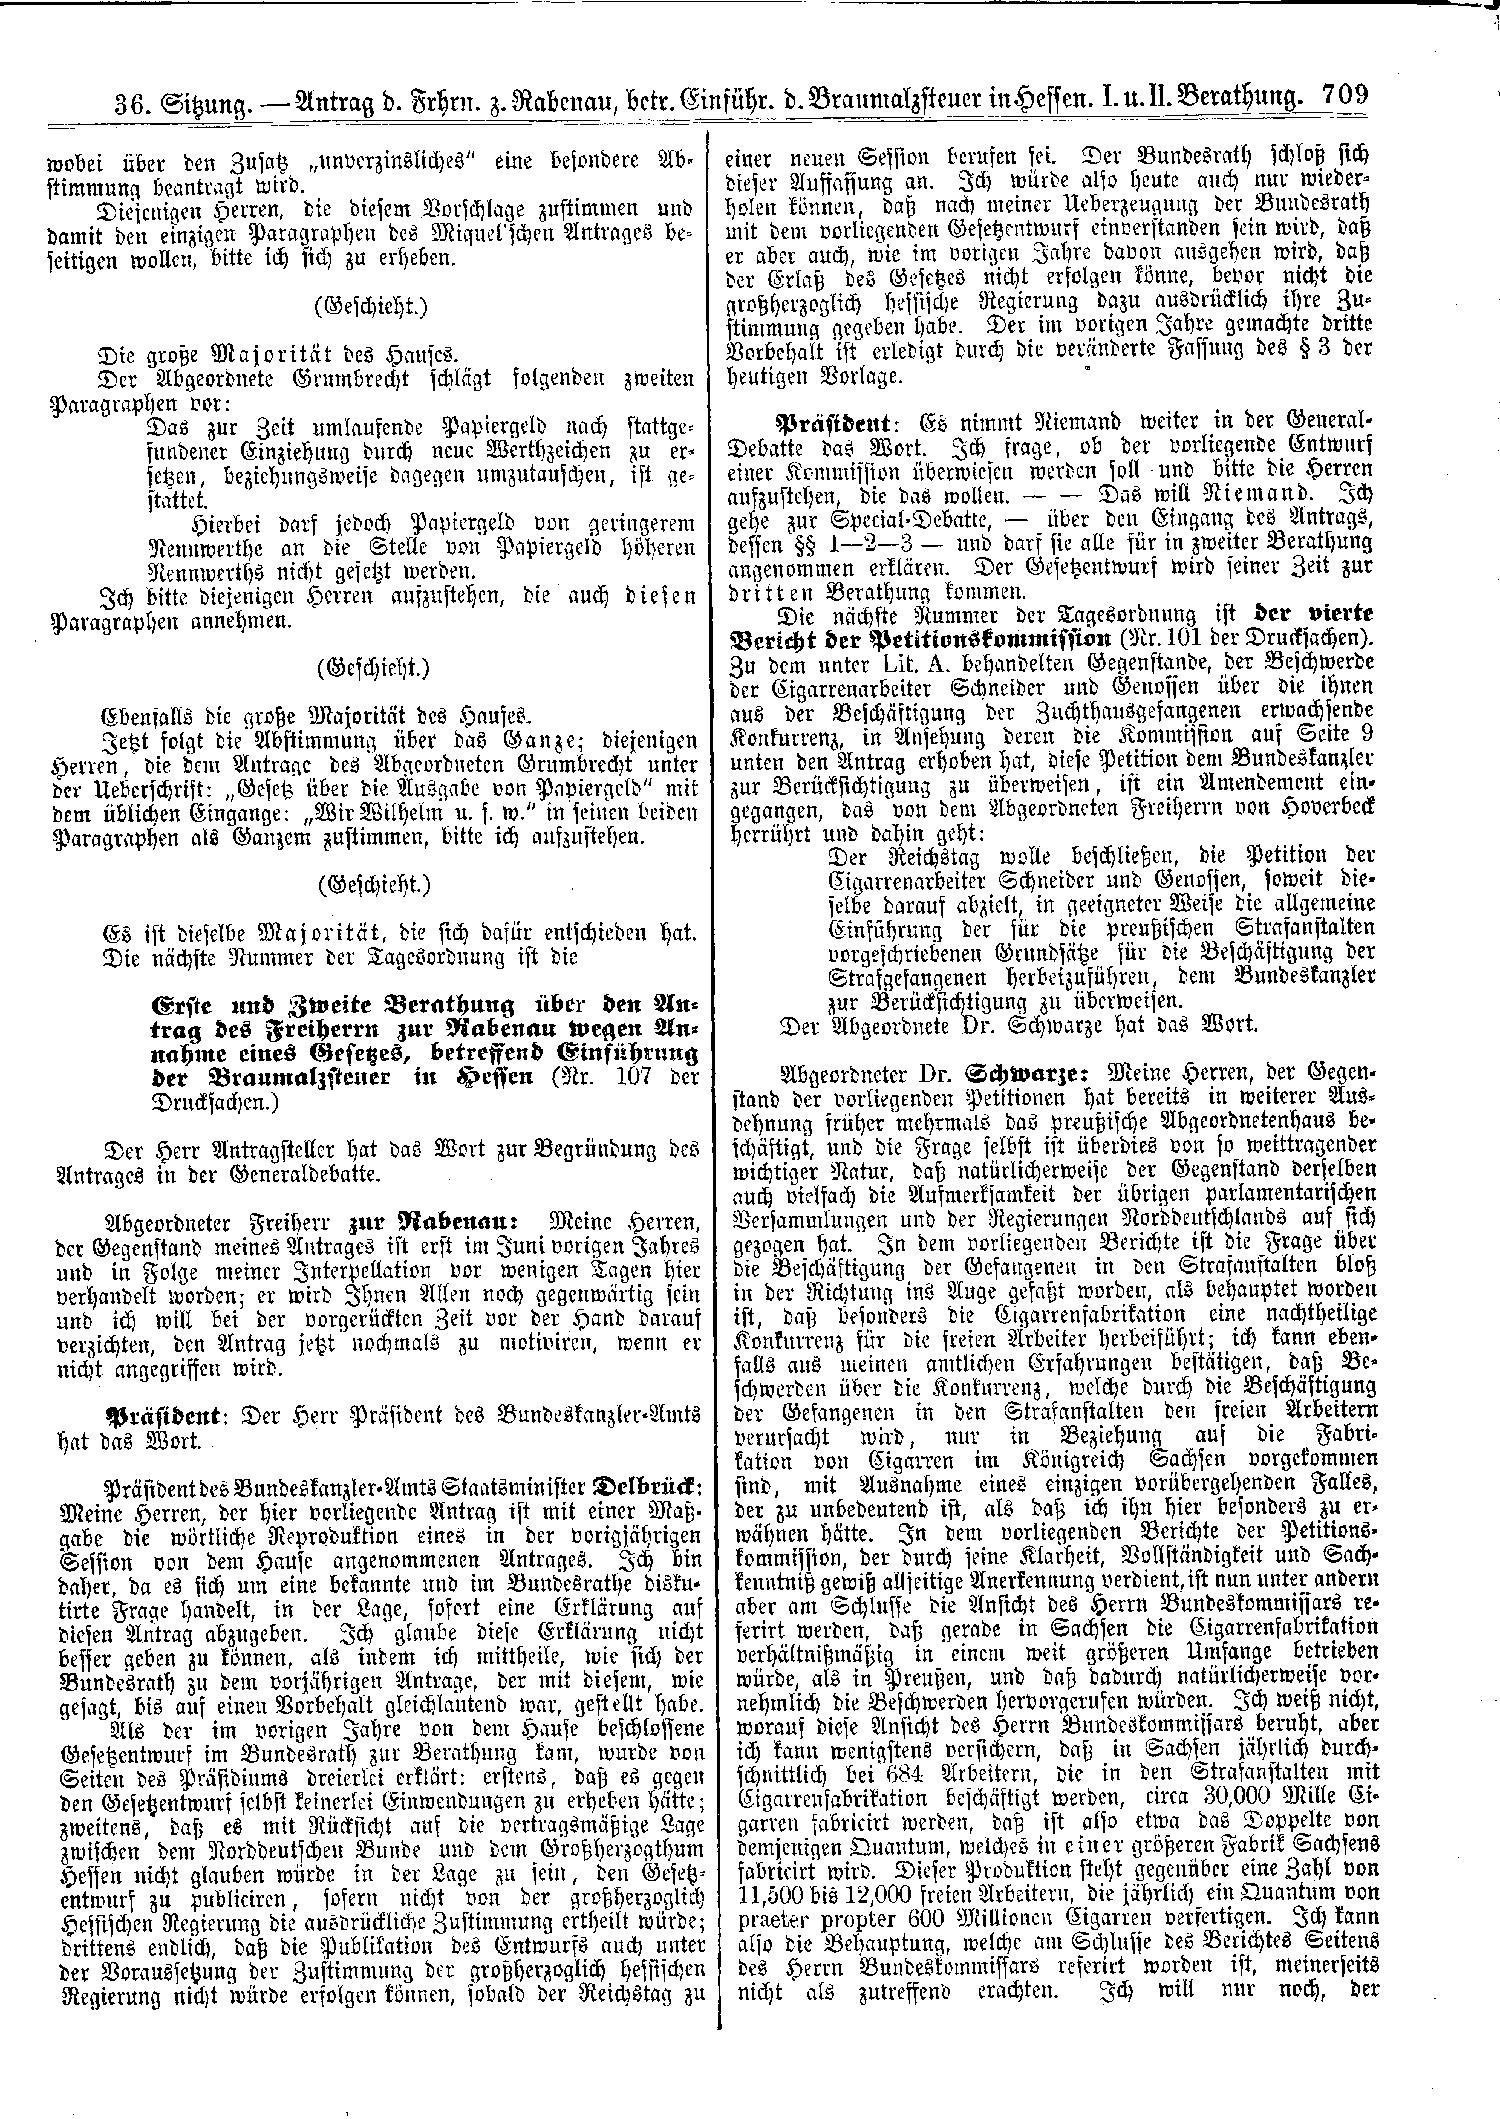 Scan of page 709